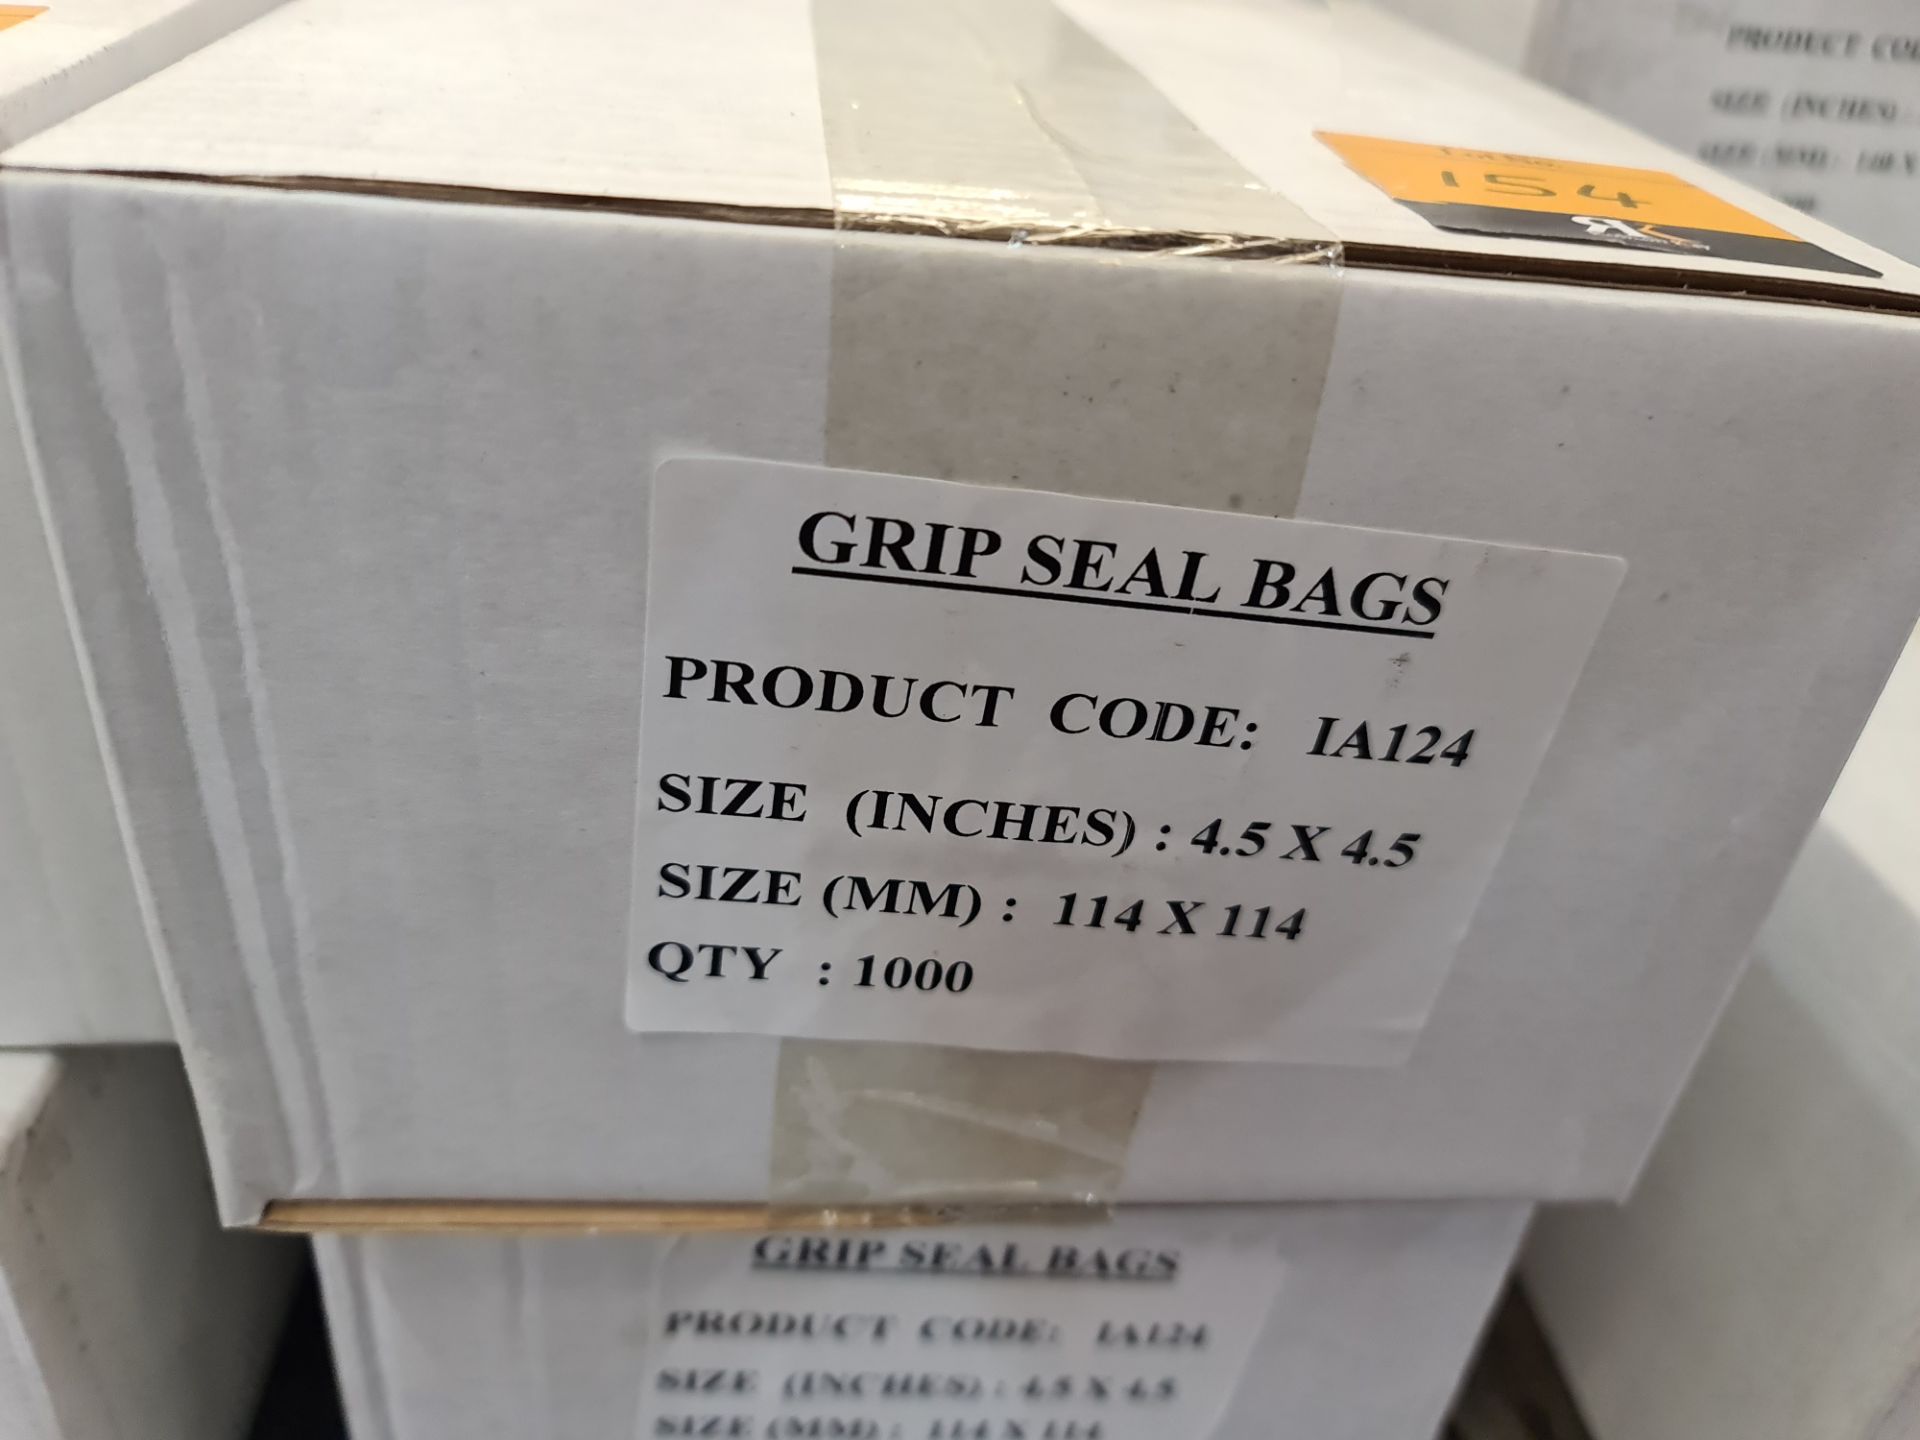 9 boxes of Grip Seal bags - each box contains 1,000 114 x 114mm bags - Image 2 of 4